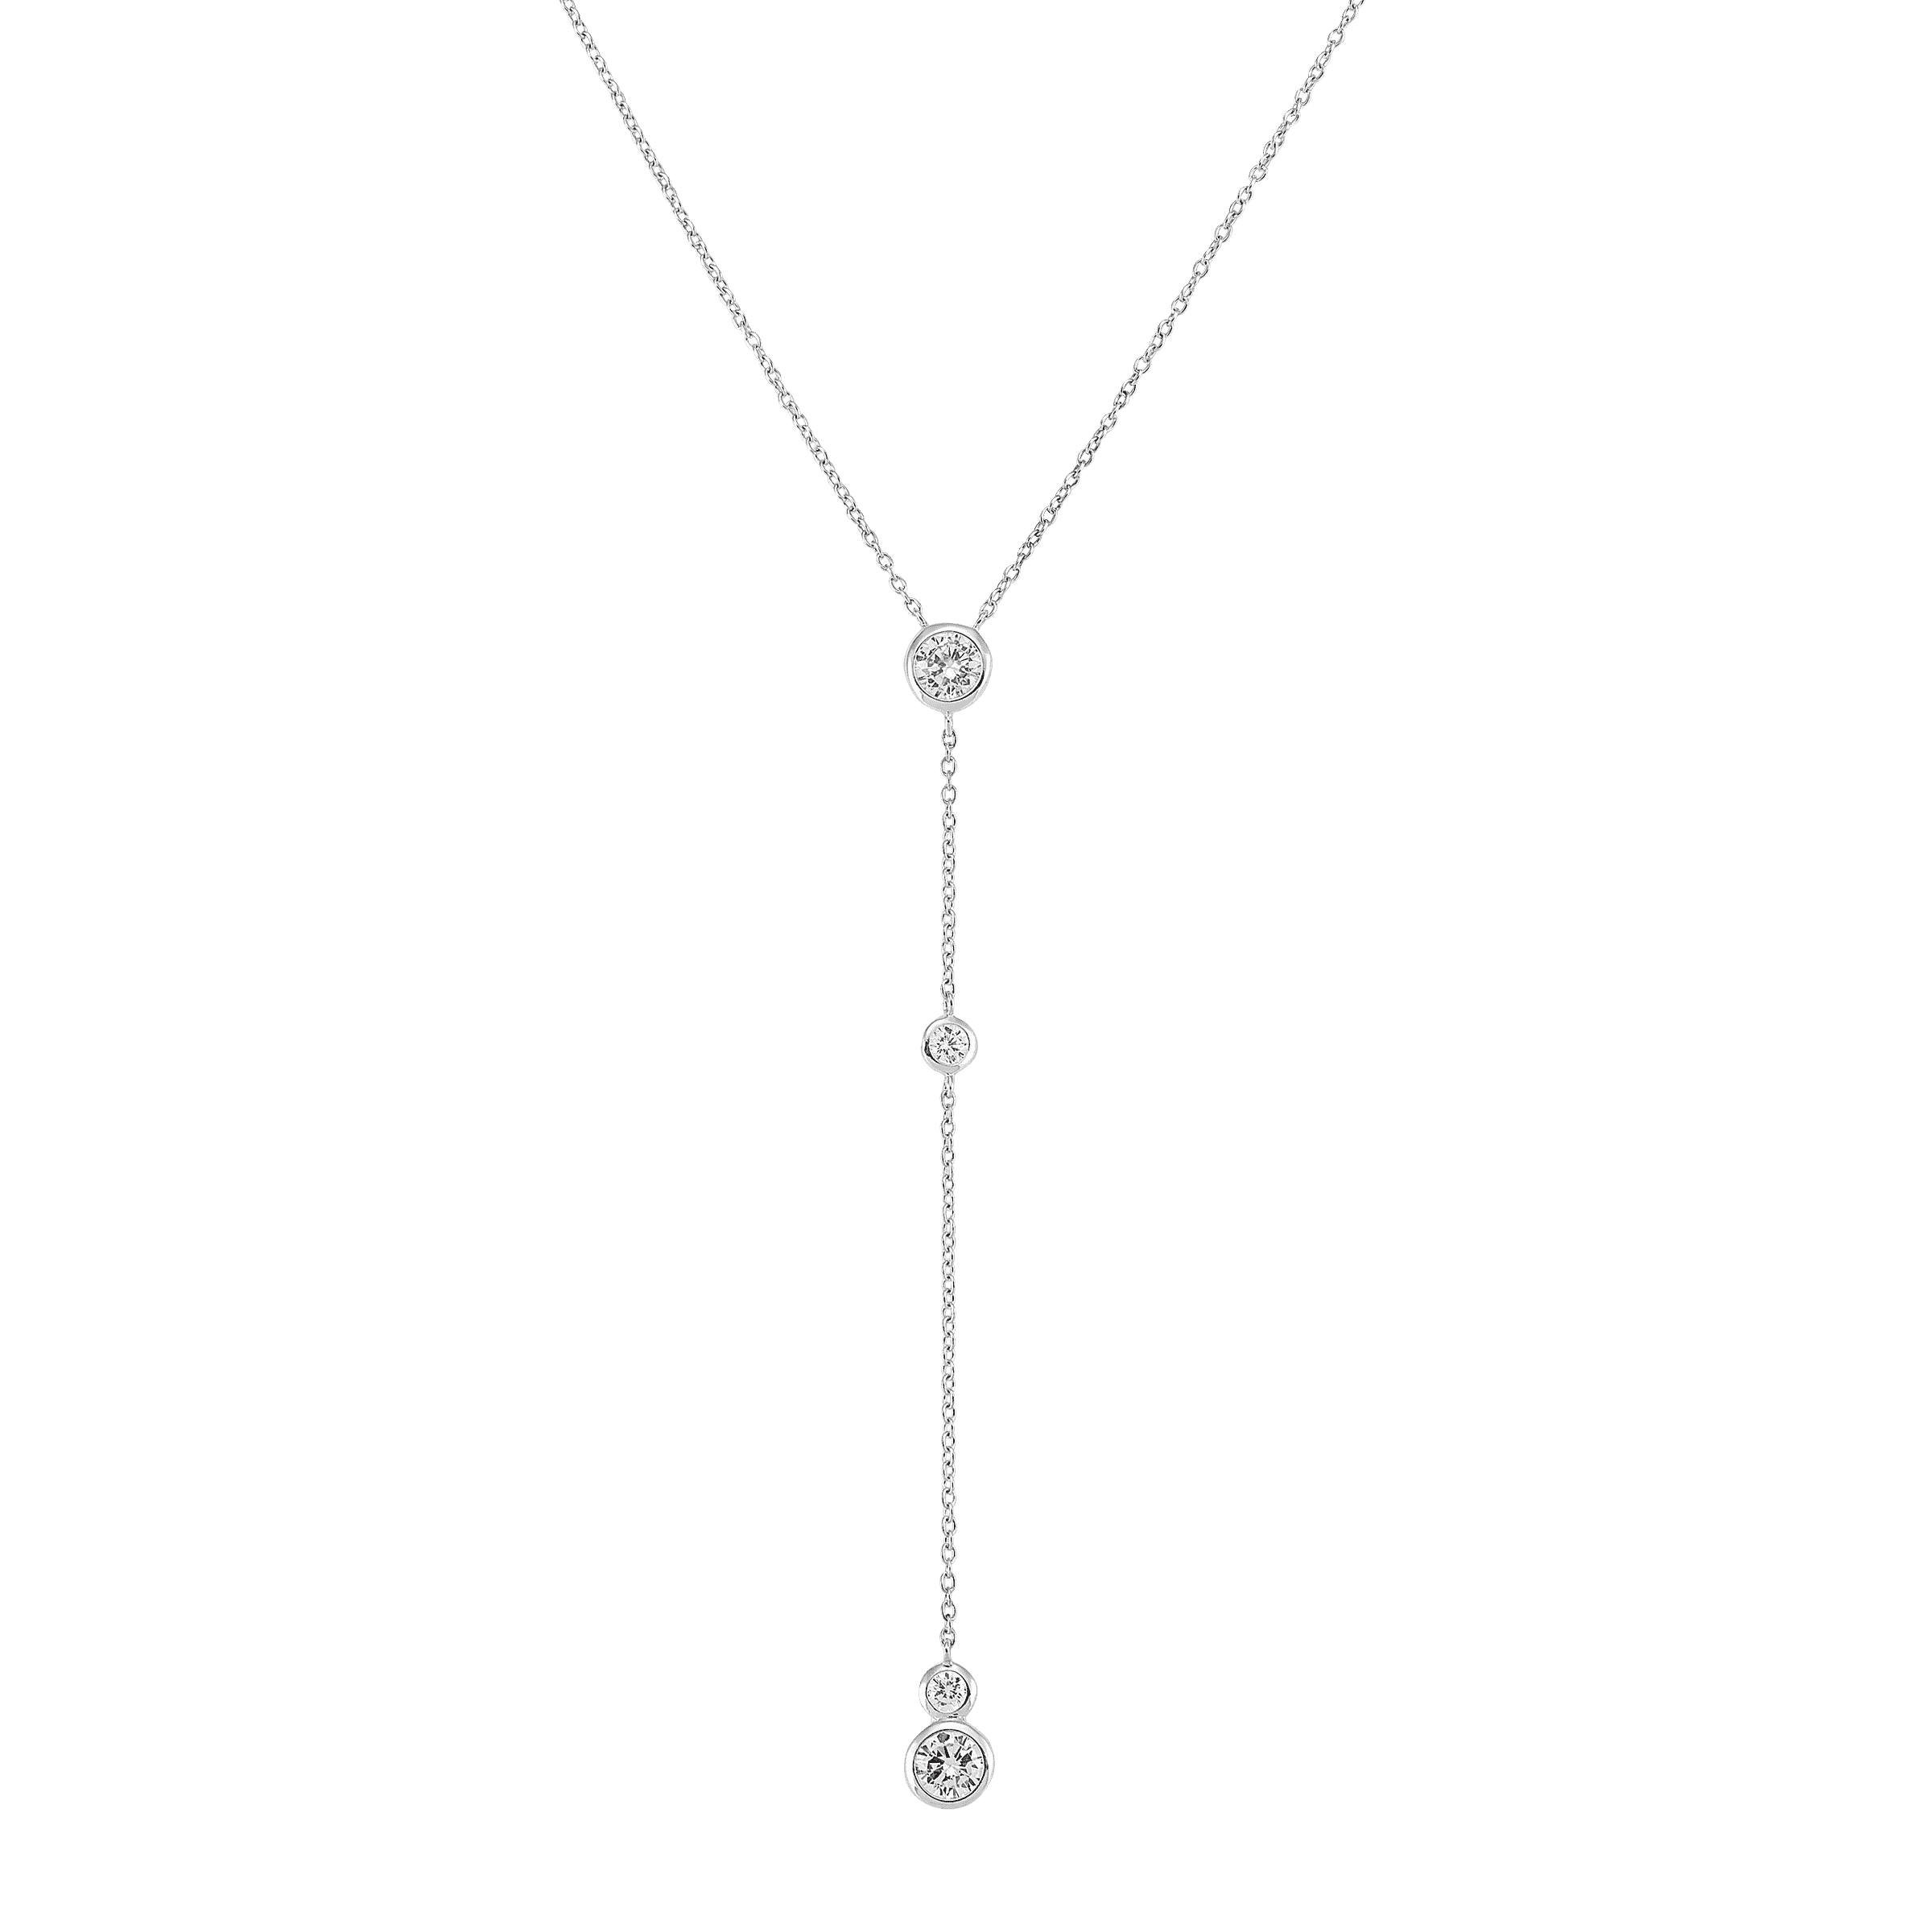 Silpada 'Marvel' Sterling Silver and Cubic Zirconia Necklace 16+2" 